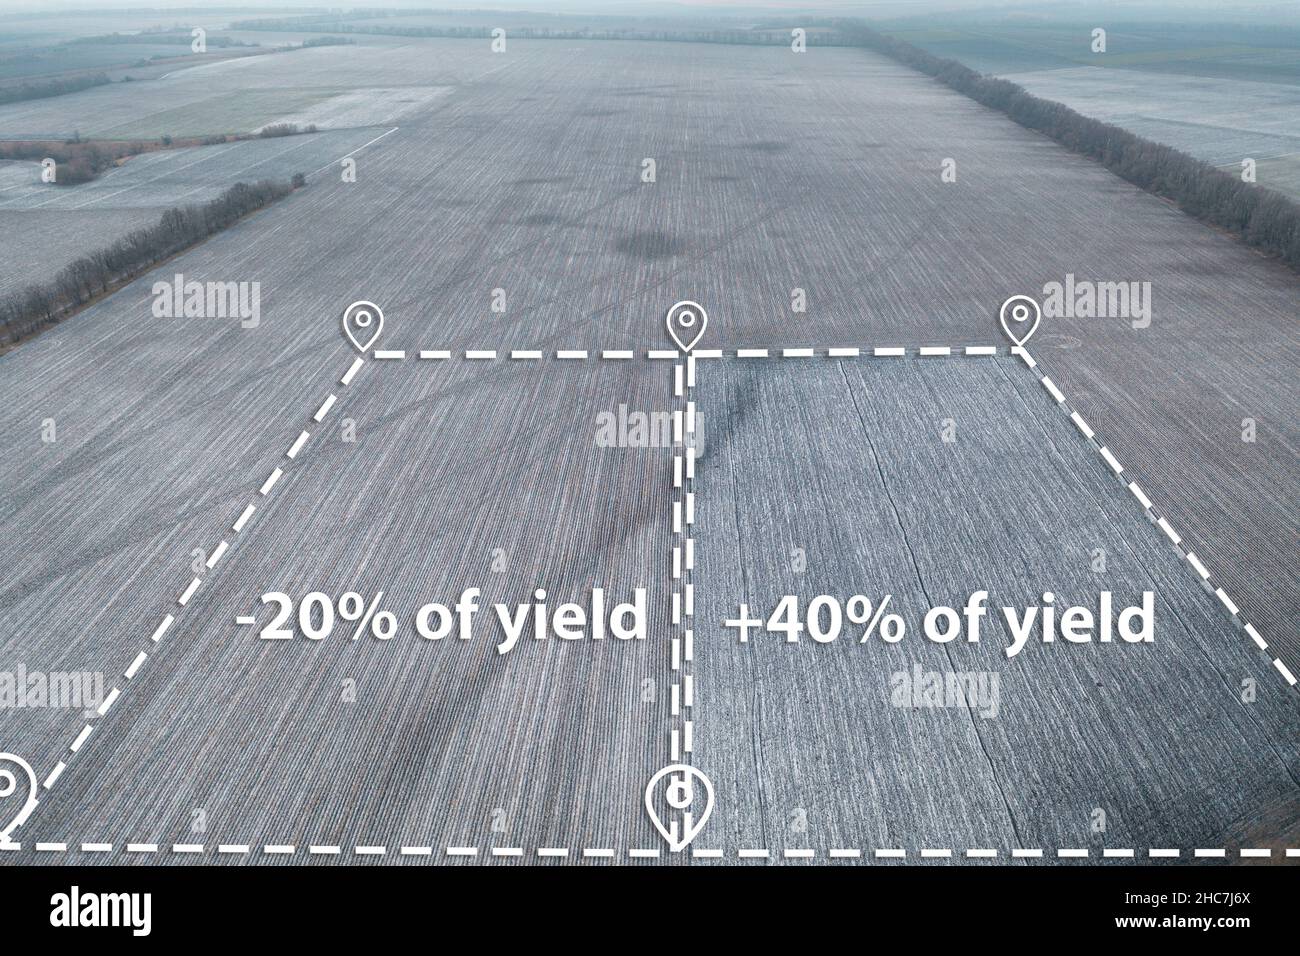 Comparing yields in two areas of the field Concept. Topographic map of agricultural land plots for Farming. Sale field land for agribusiness. Land Management for farming investment. Stock Photo